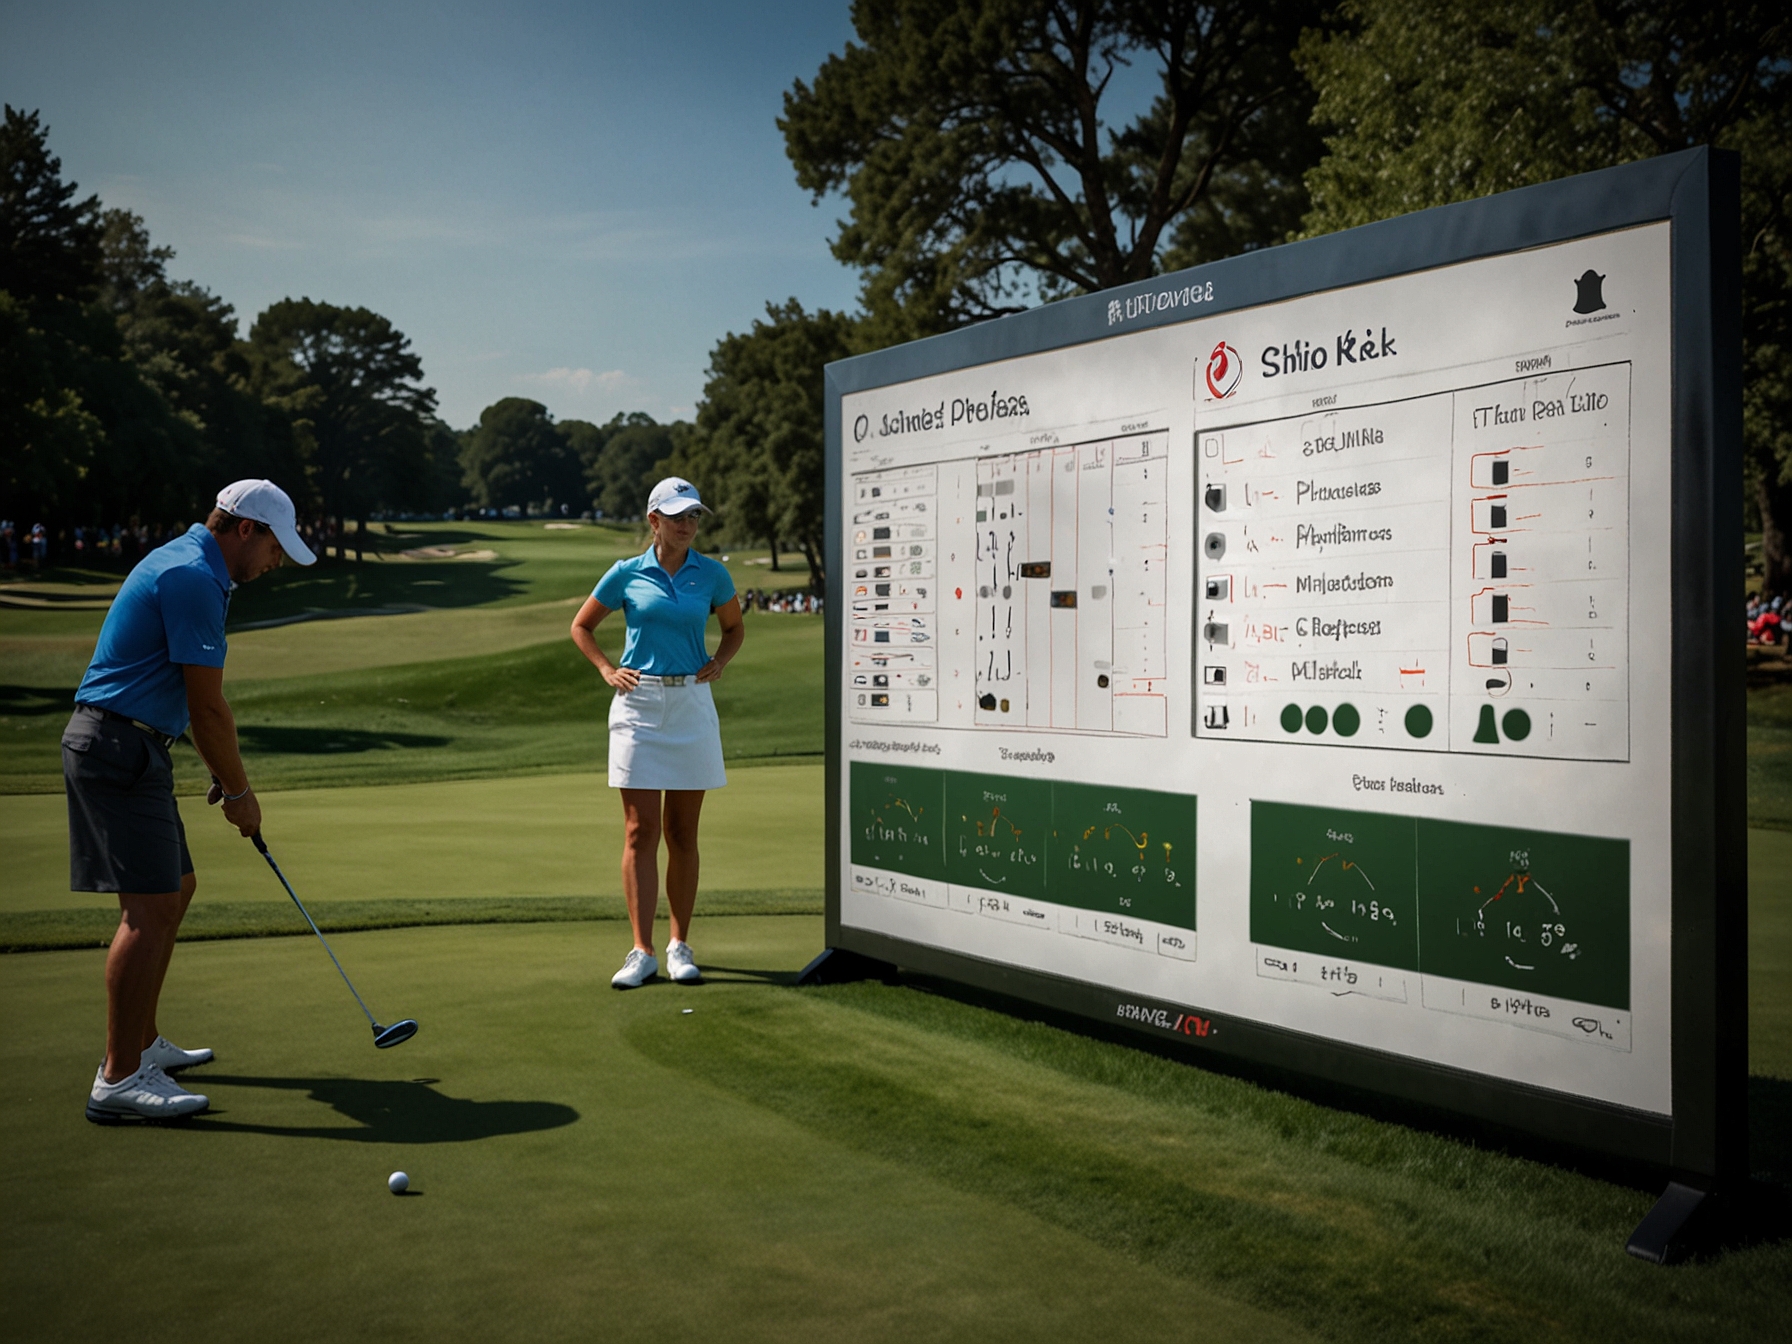 The new ShotLink technology being used during the Travelers Championship, displaying real-time shot data and performance metrics, which has sparked controversy for allegedly mimicking LIV Golf's innovations.